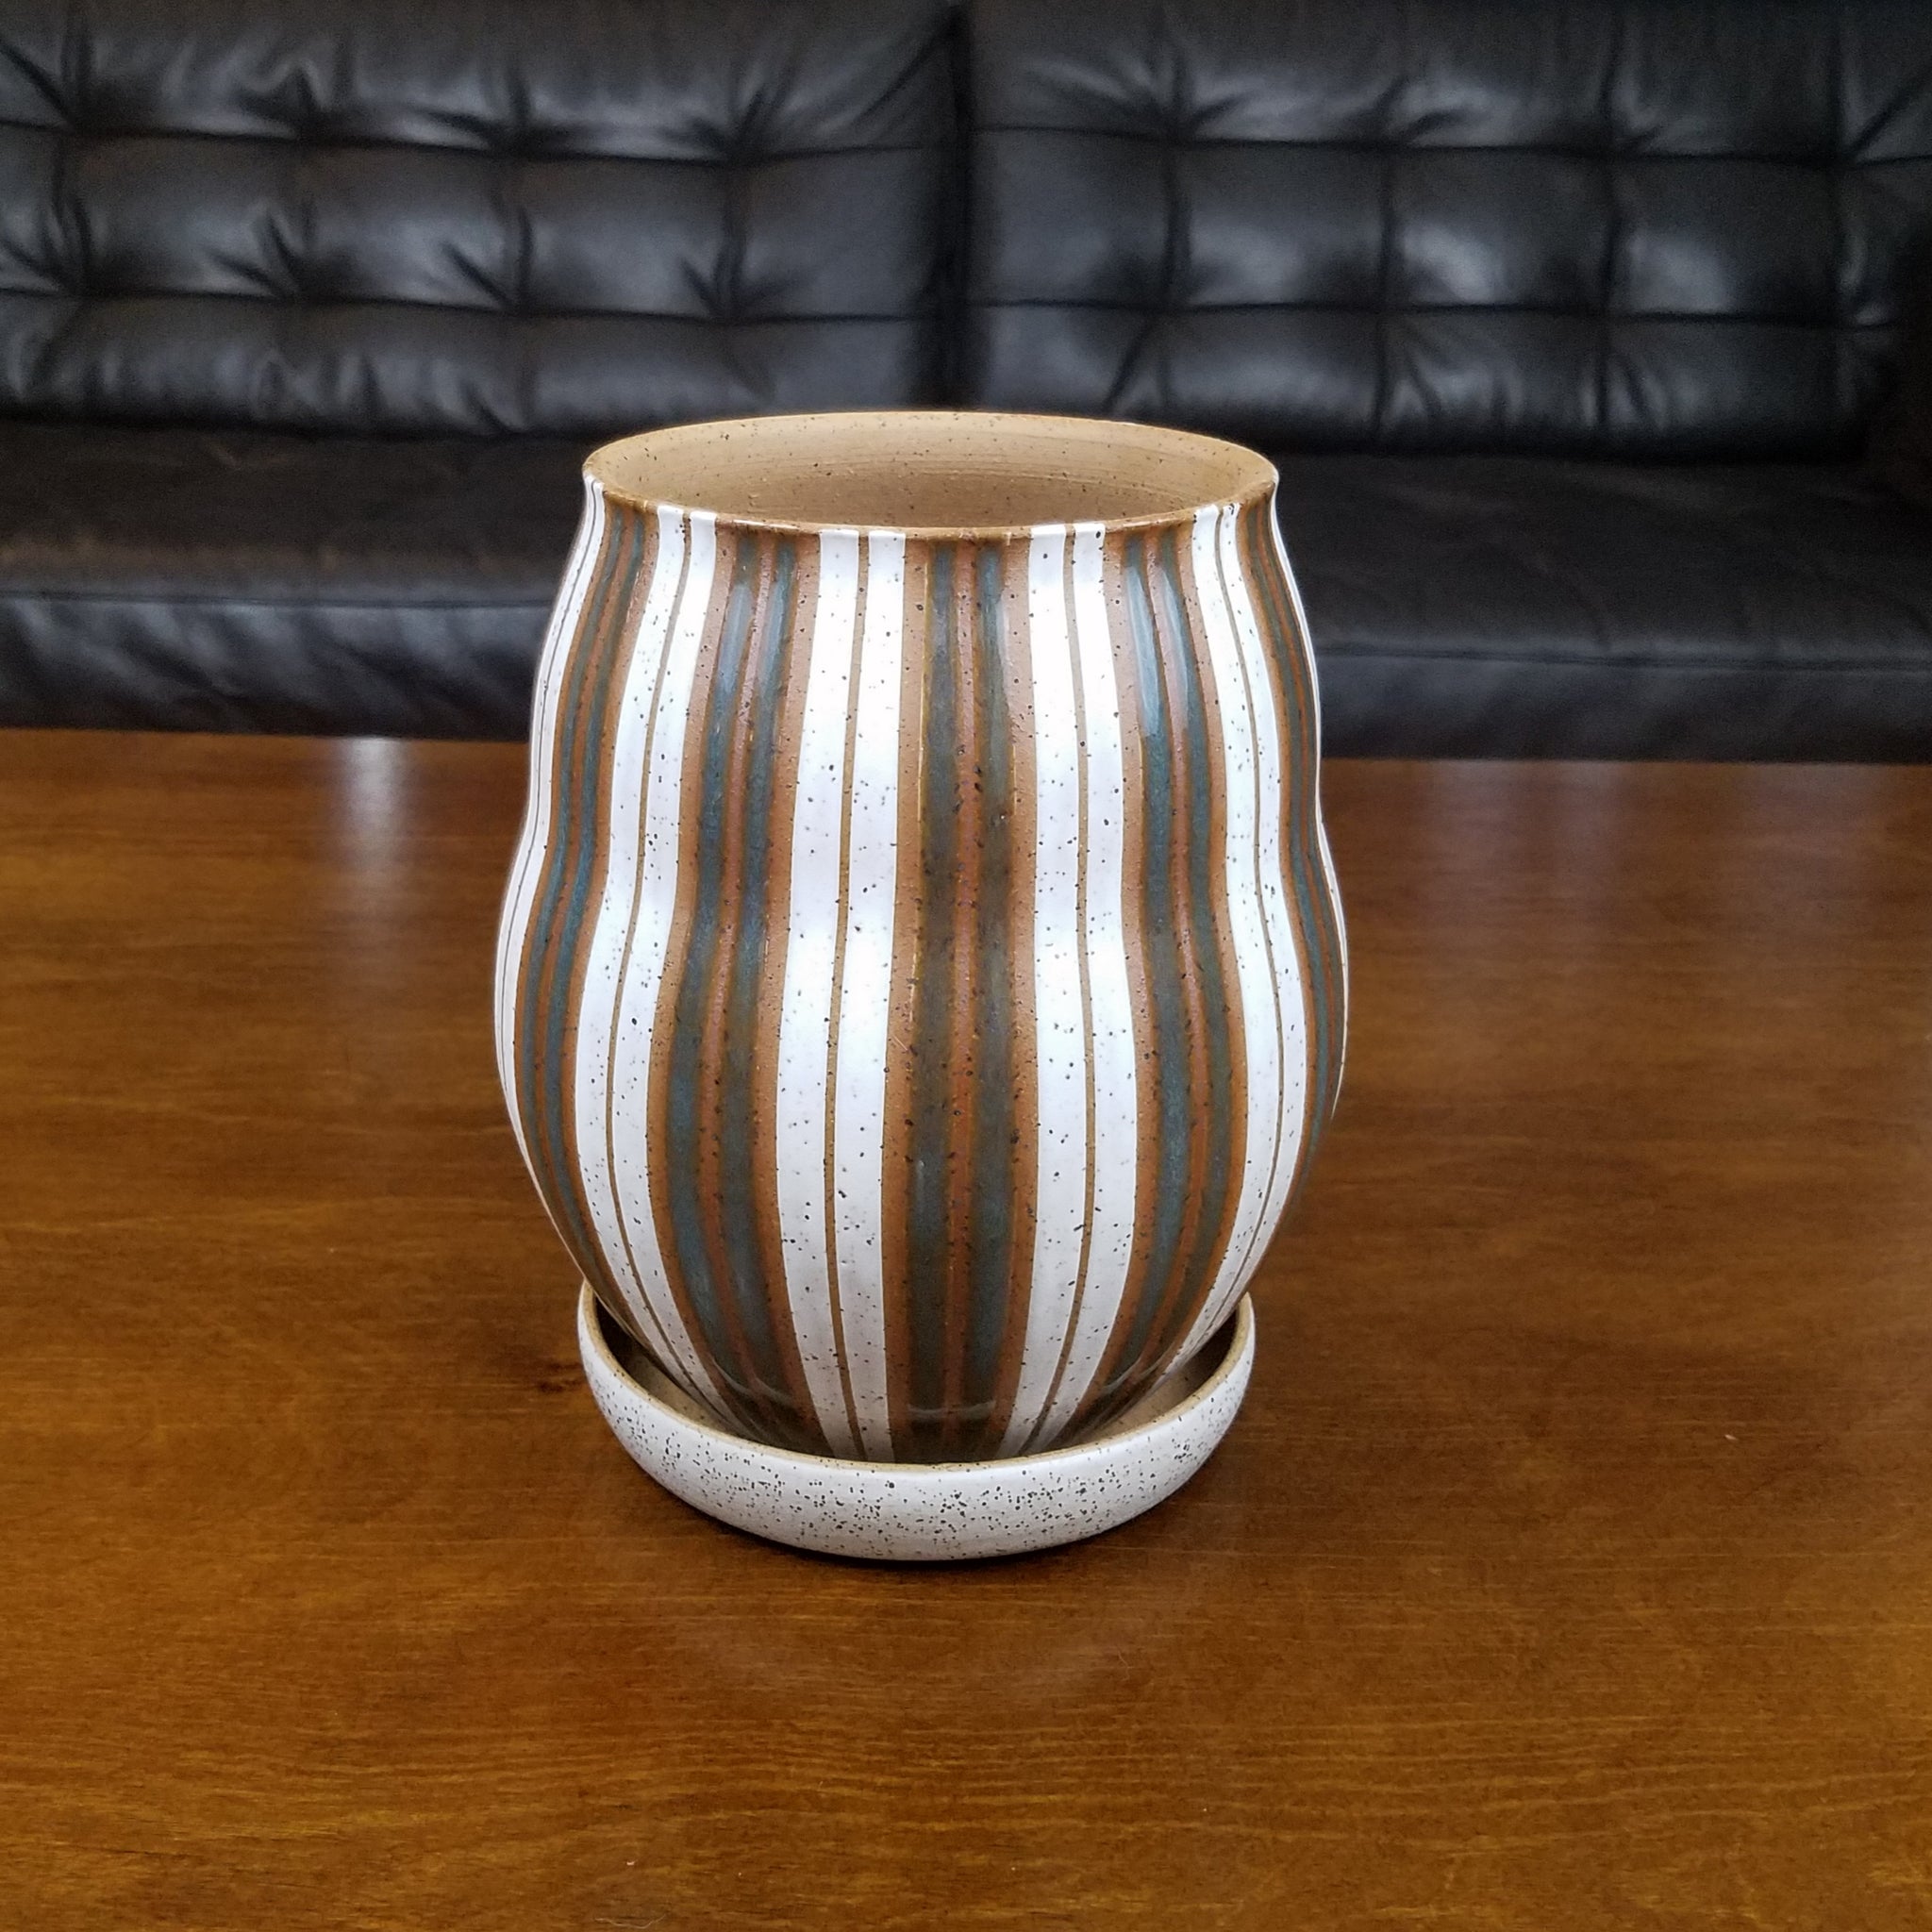 Striped Planter on Speckled Clay (7 in / 18 cm tall)